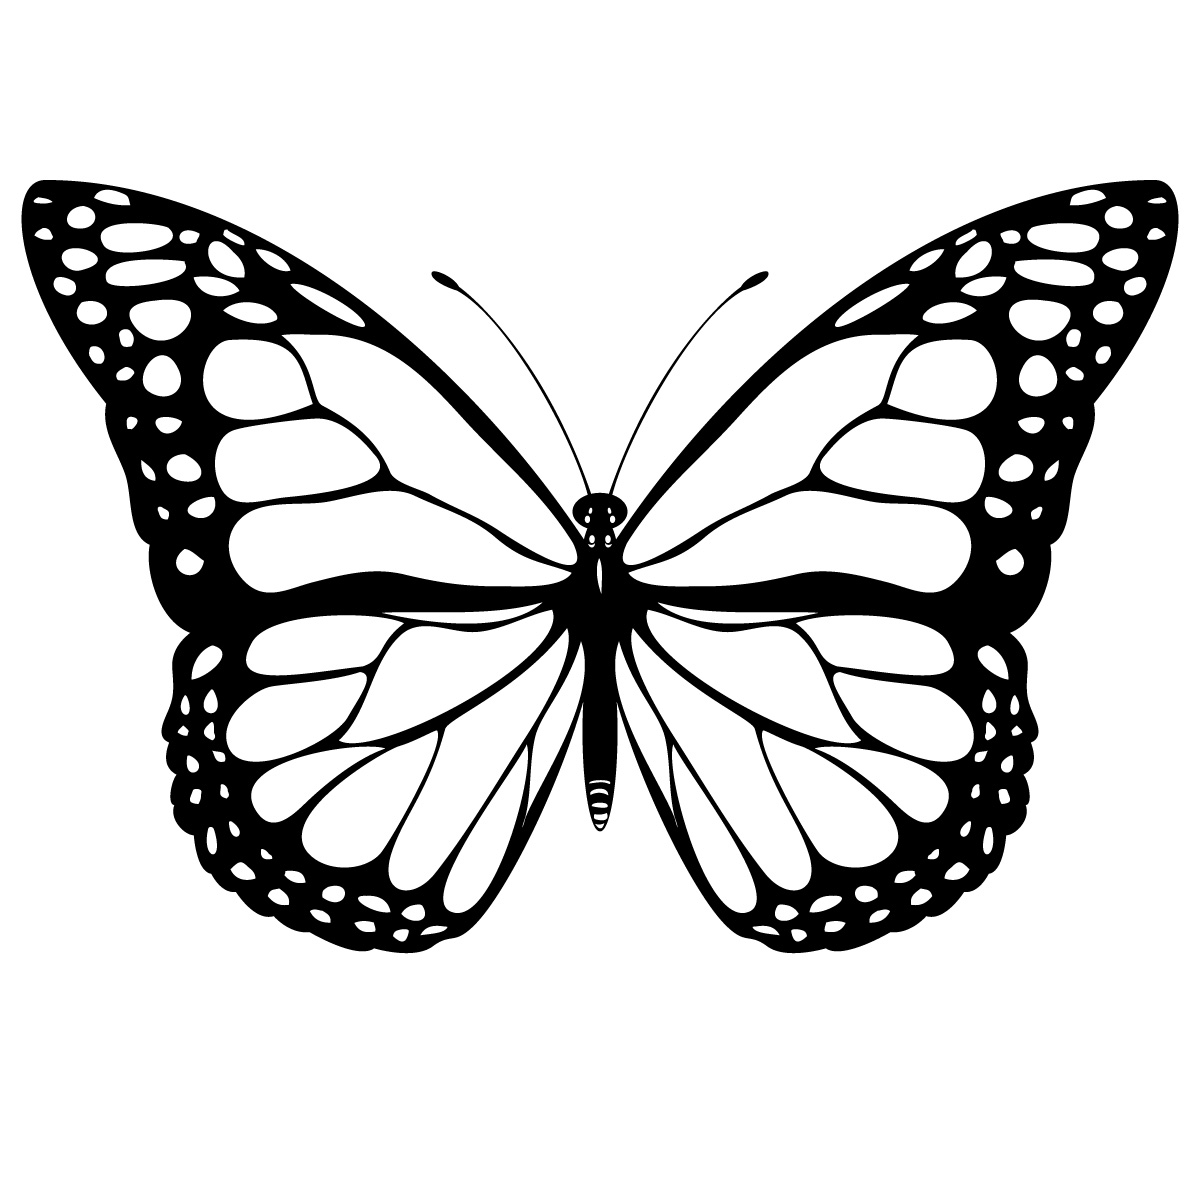 Butterfly Coloring Page   Dr. Odd